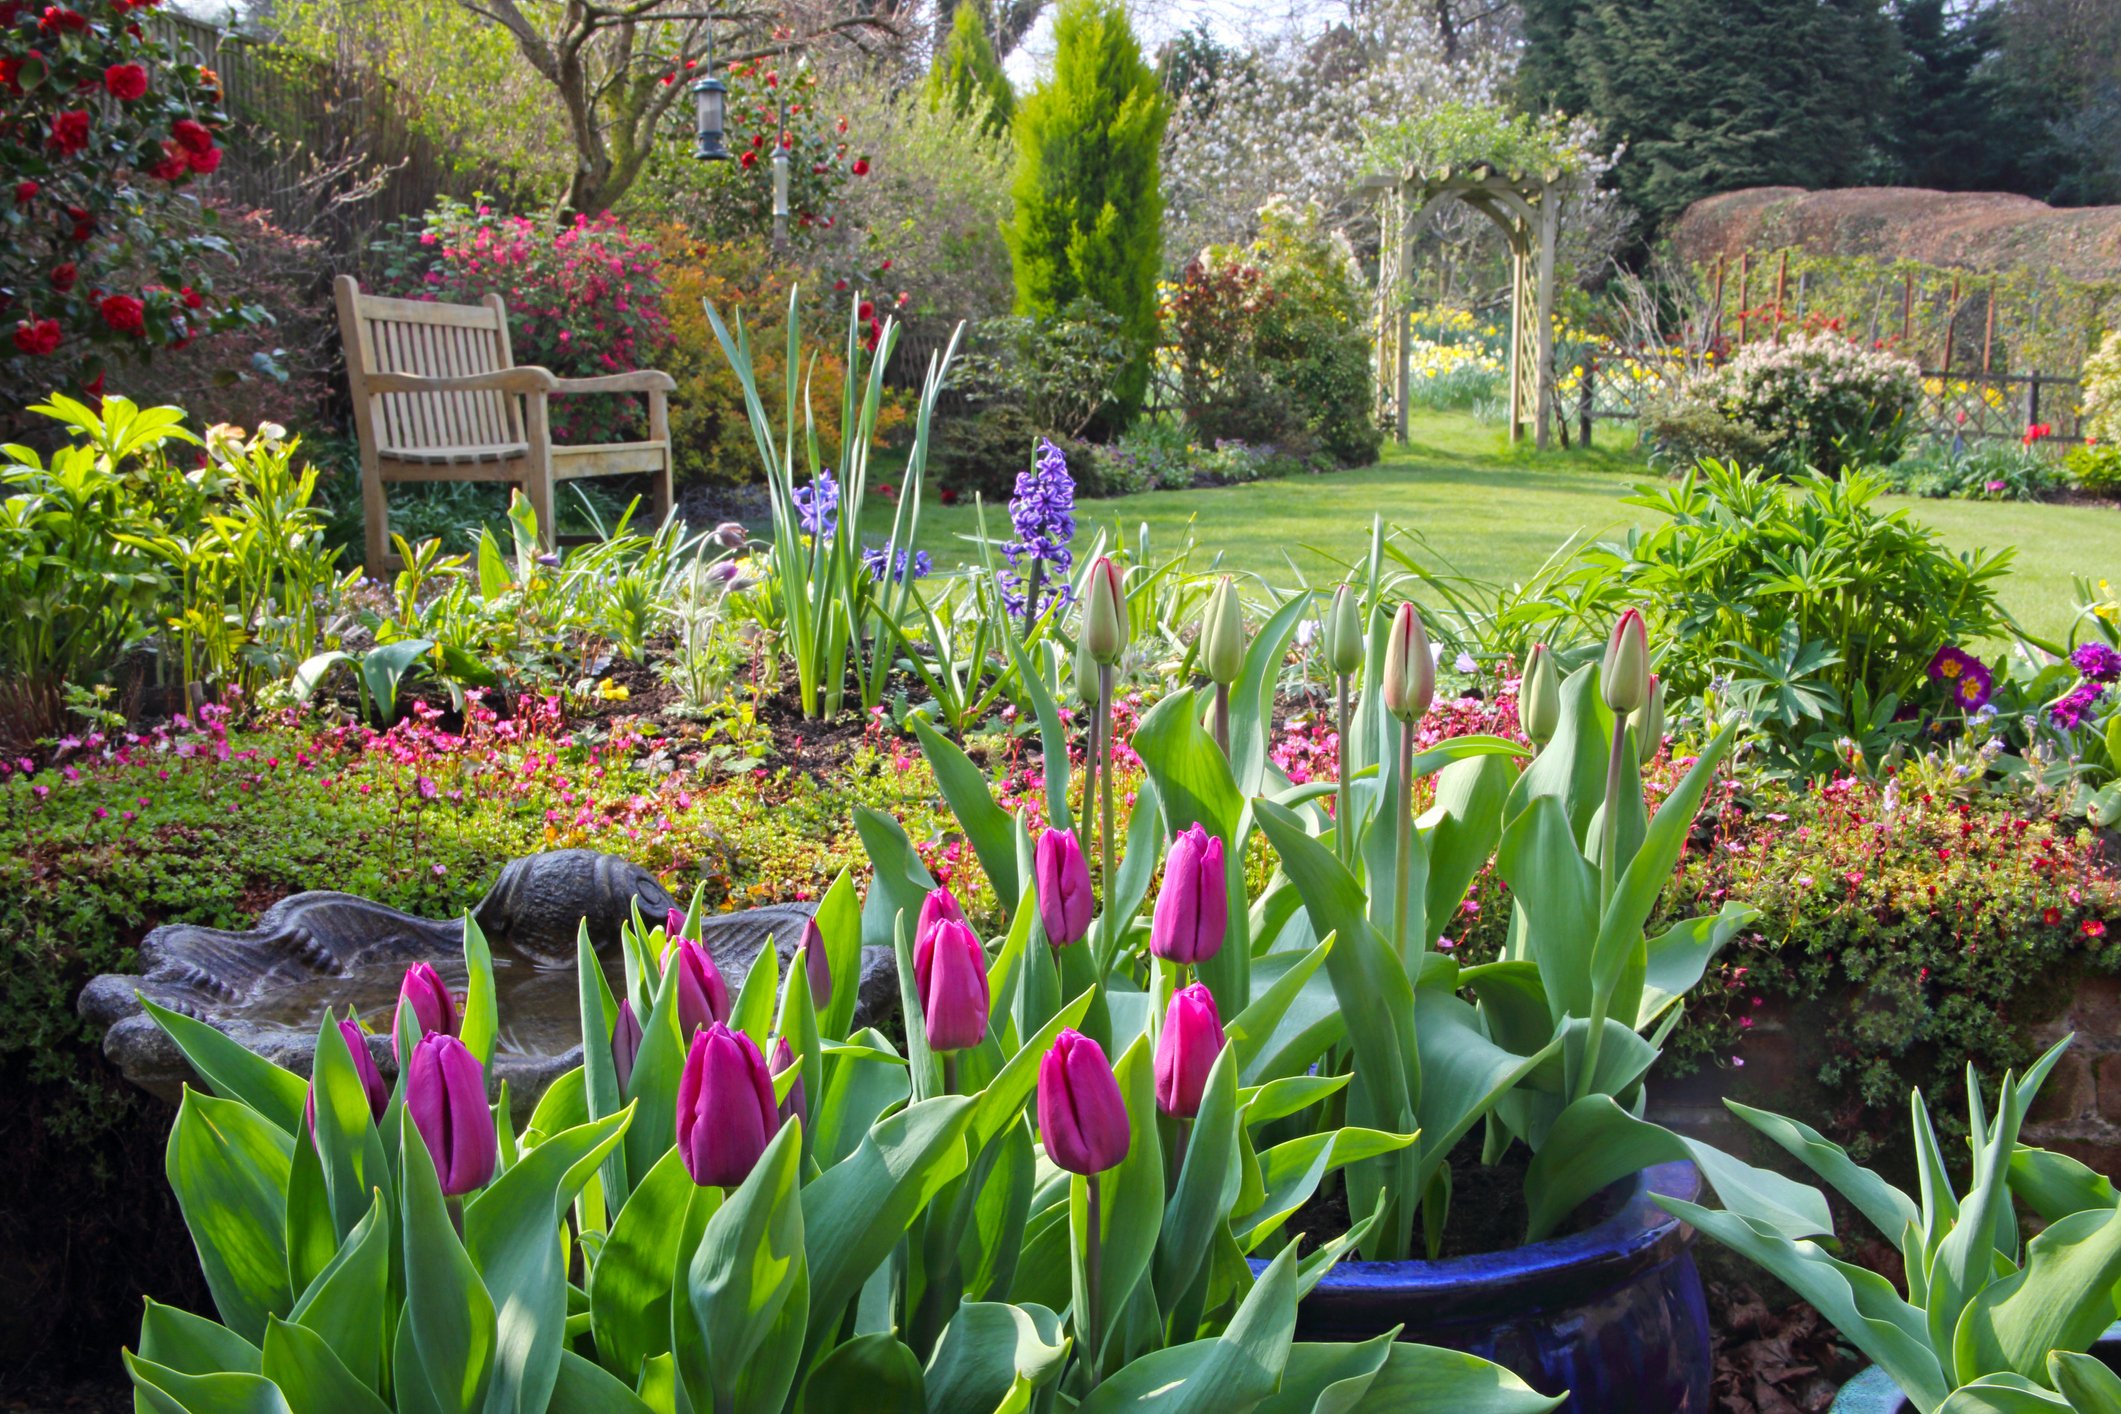 English country garden in spring with pots of tulips on the patio, flowers in the borders, flowering shrubs, a rose arch and a garden seat on the lawn, Haslemere, Surrey, England, UK. | Photo: Getty Images